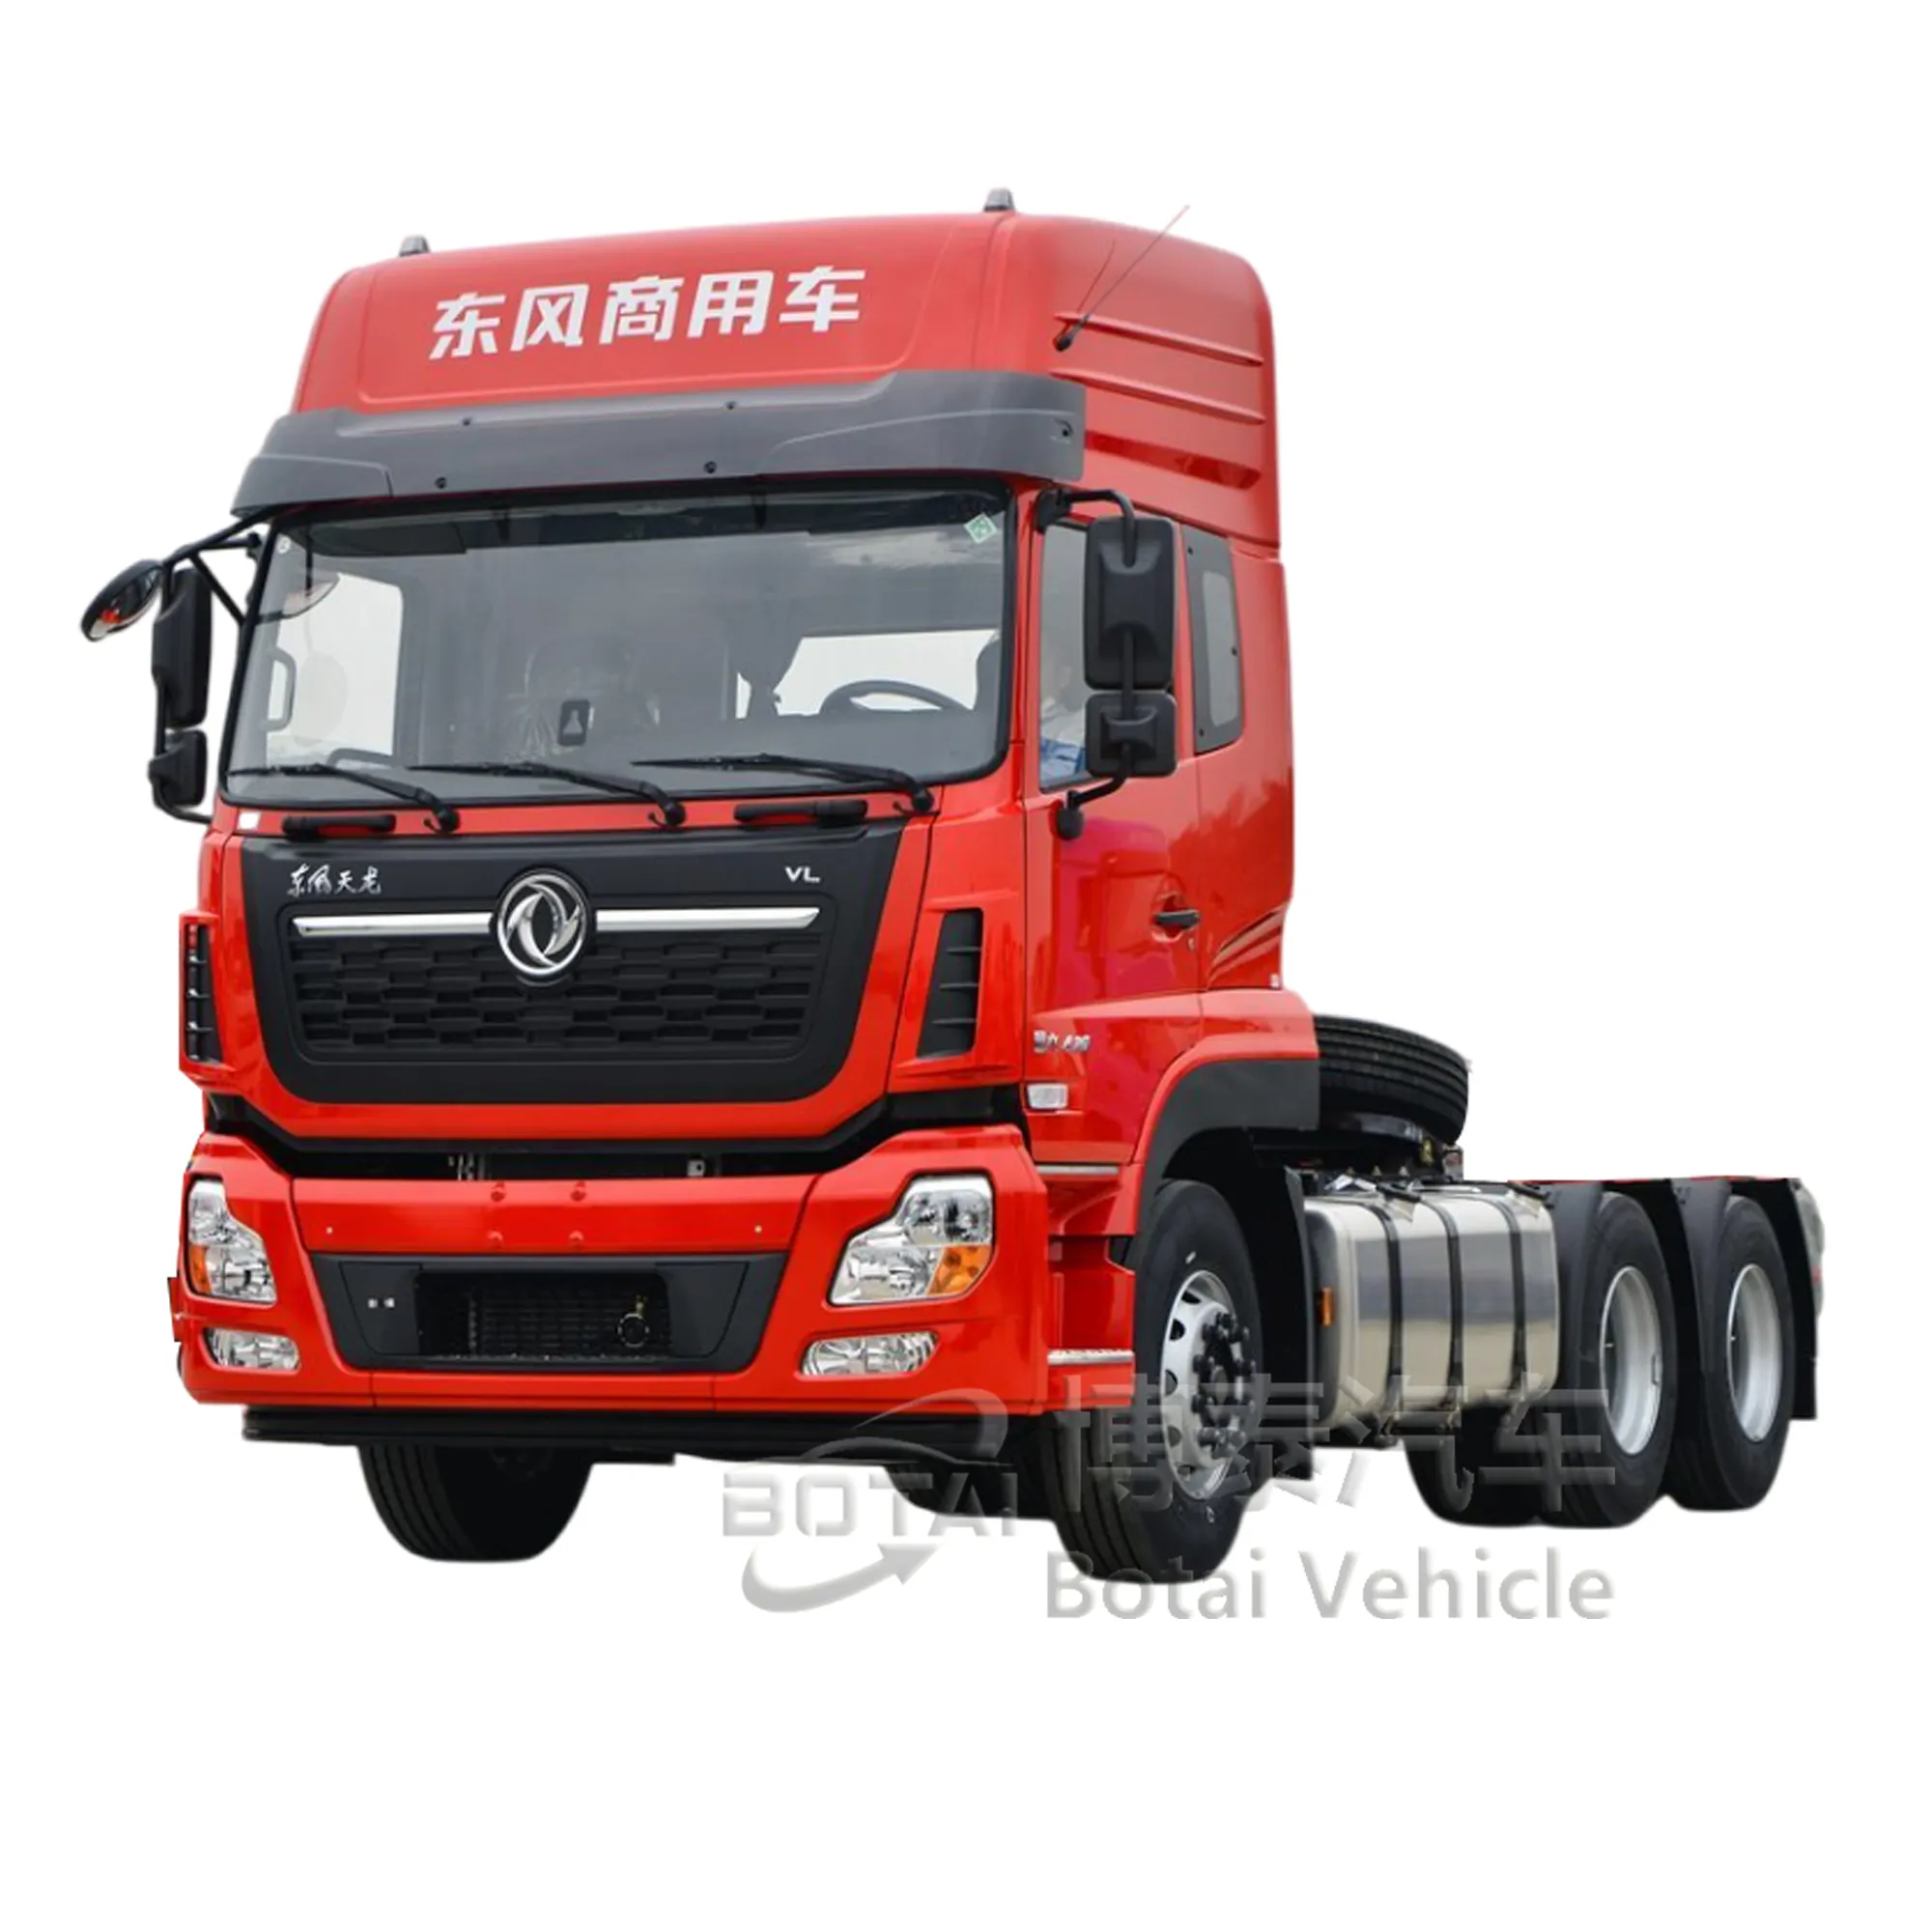 China Supplier Brand dump truck head 6X4 8x4 for sale Import and export truck traction car Used 10 wheel trailer truck head